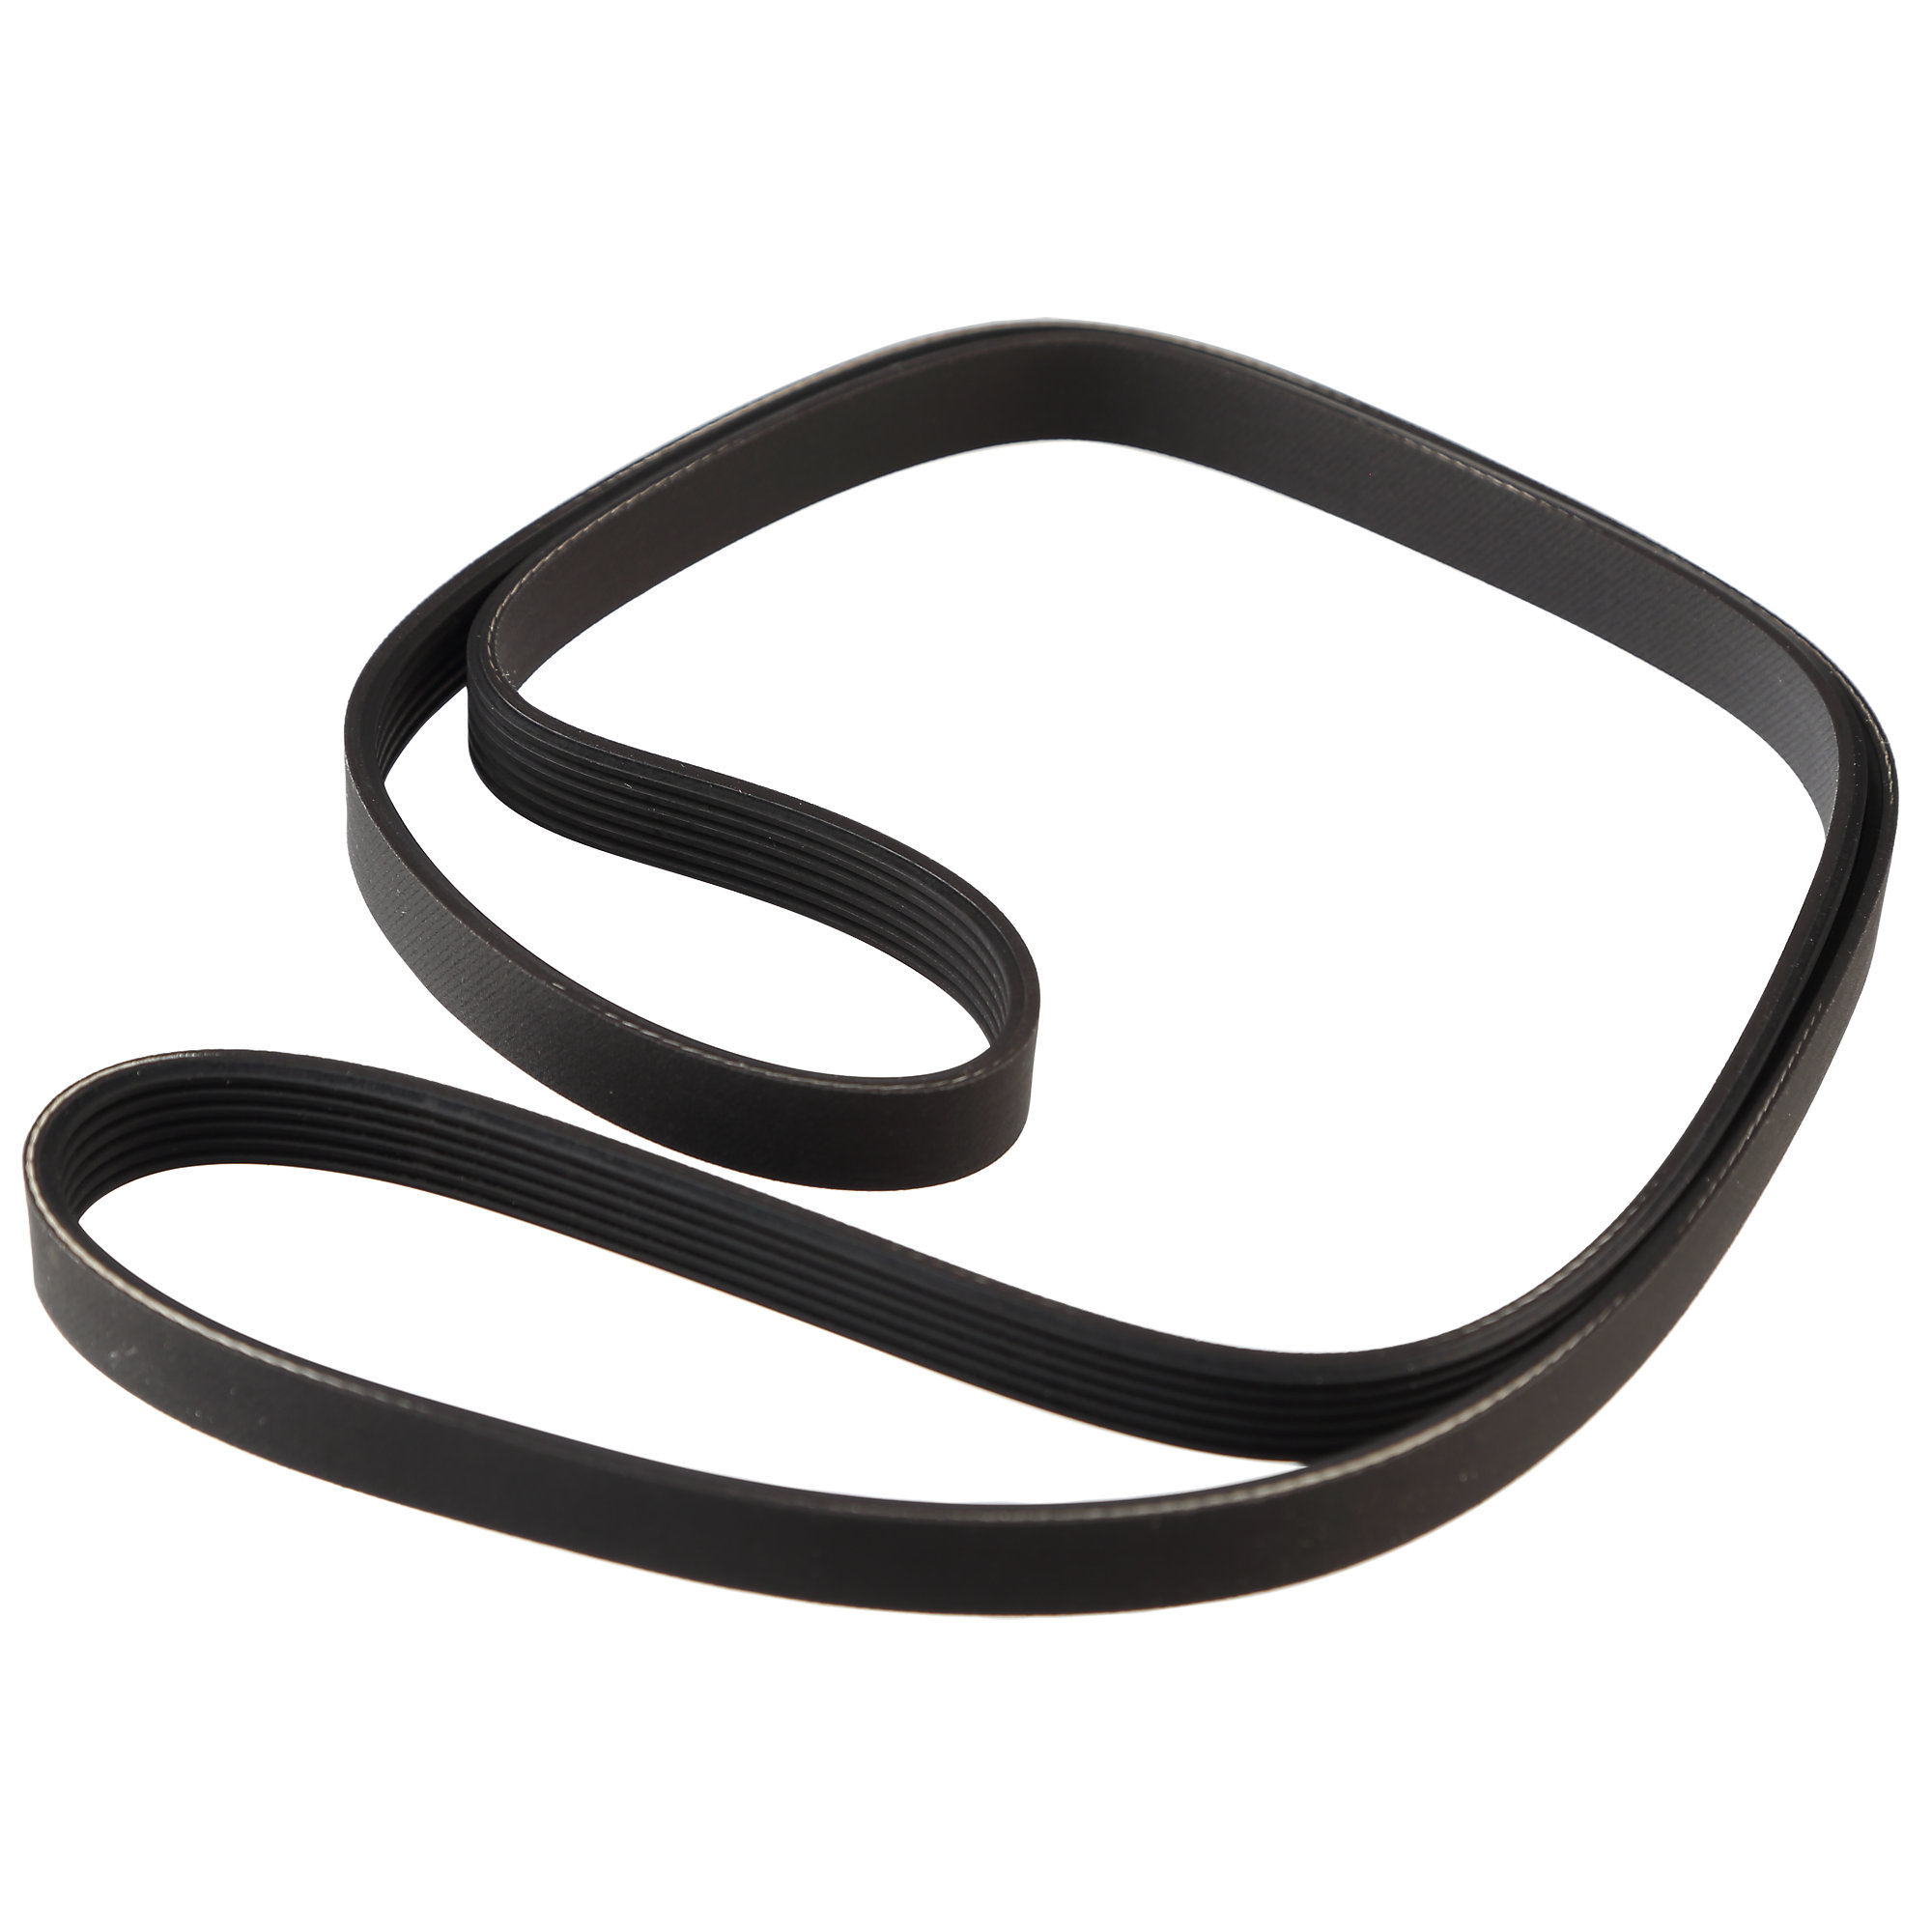 Belt for certain NordicTrack and ProForm Machines